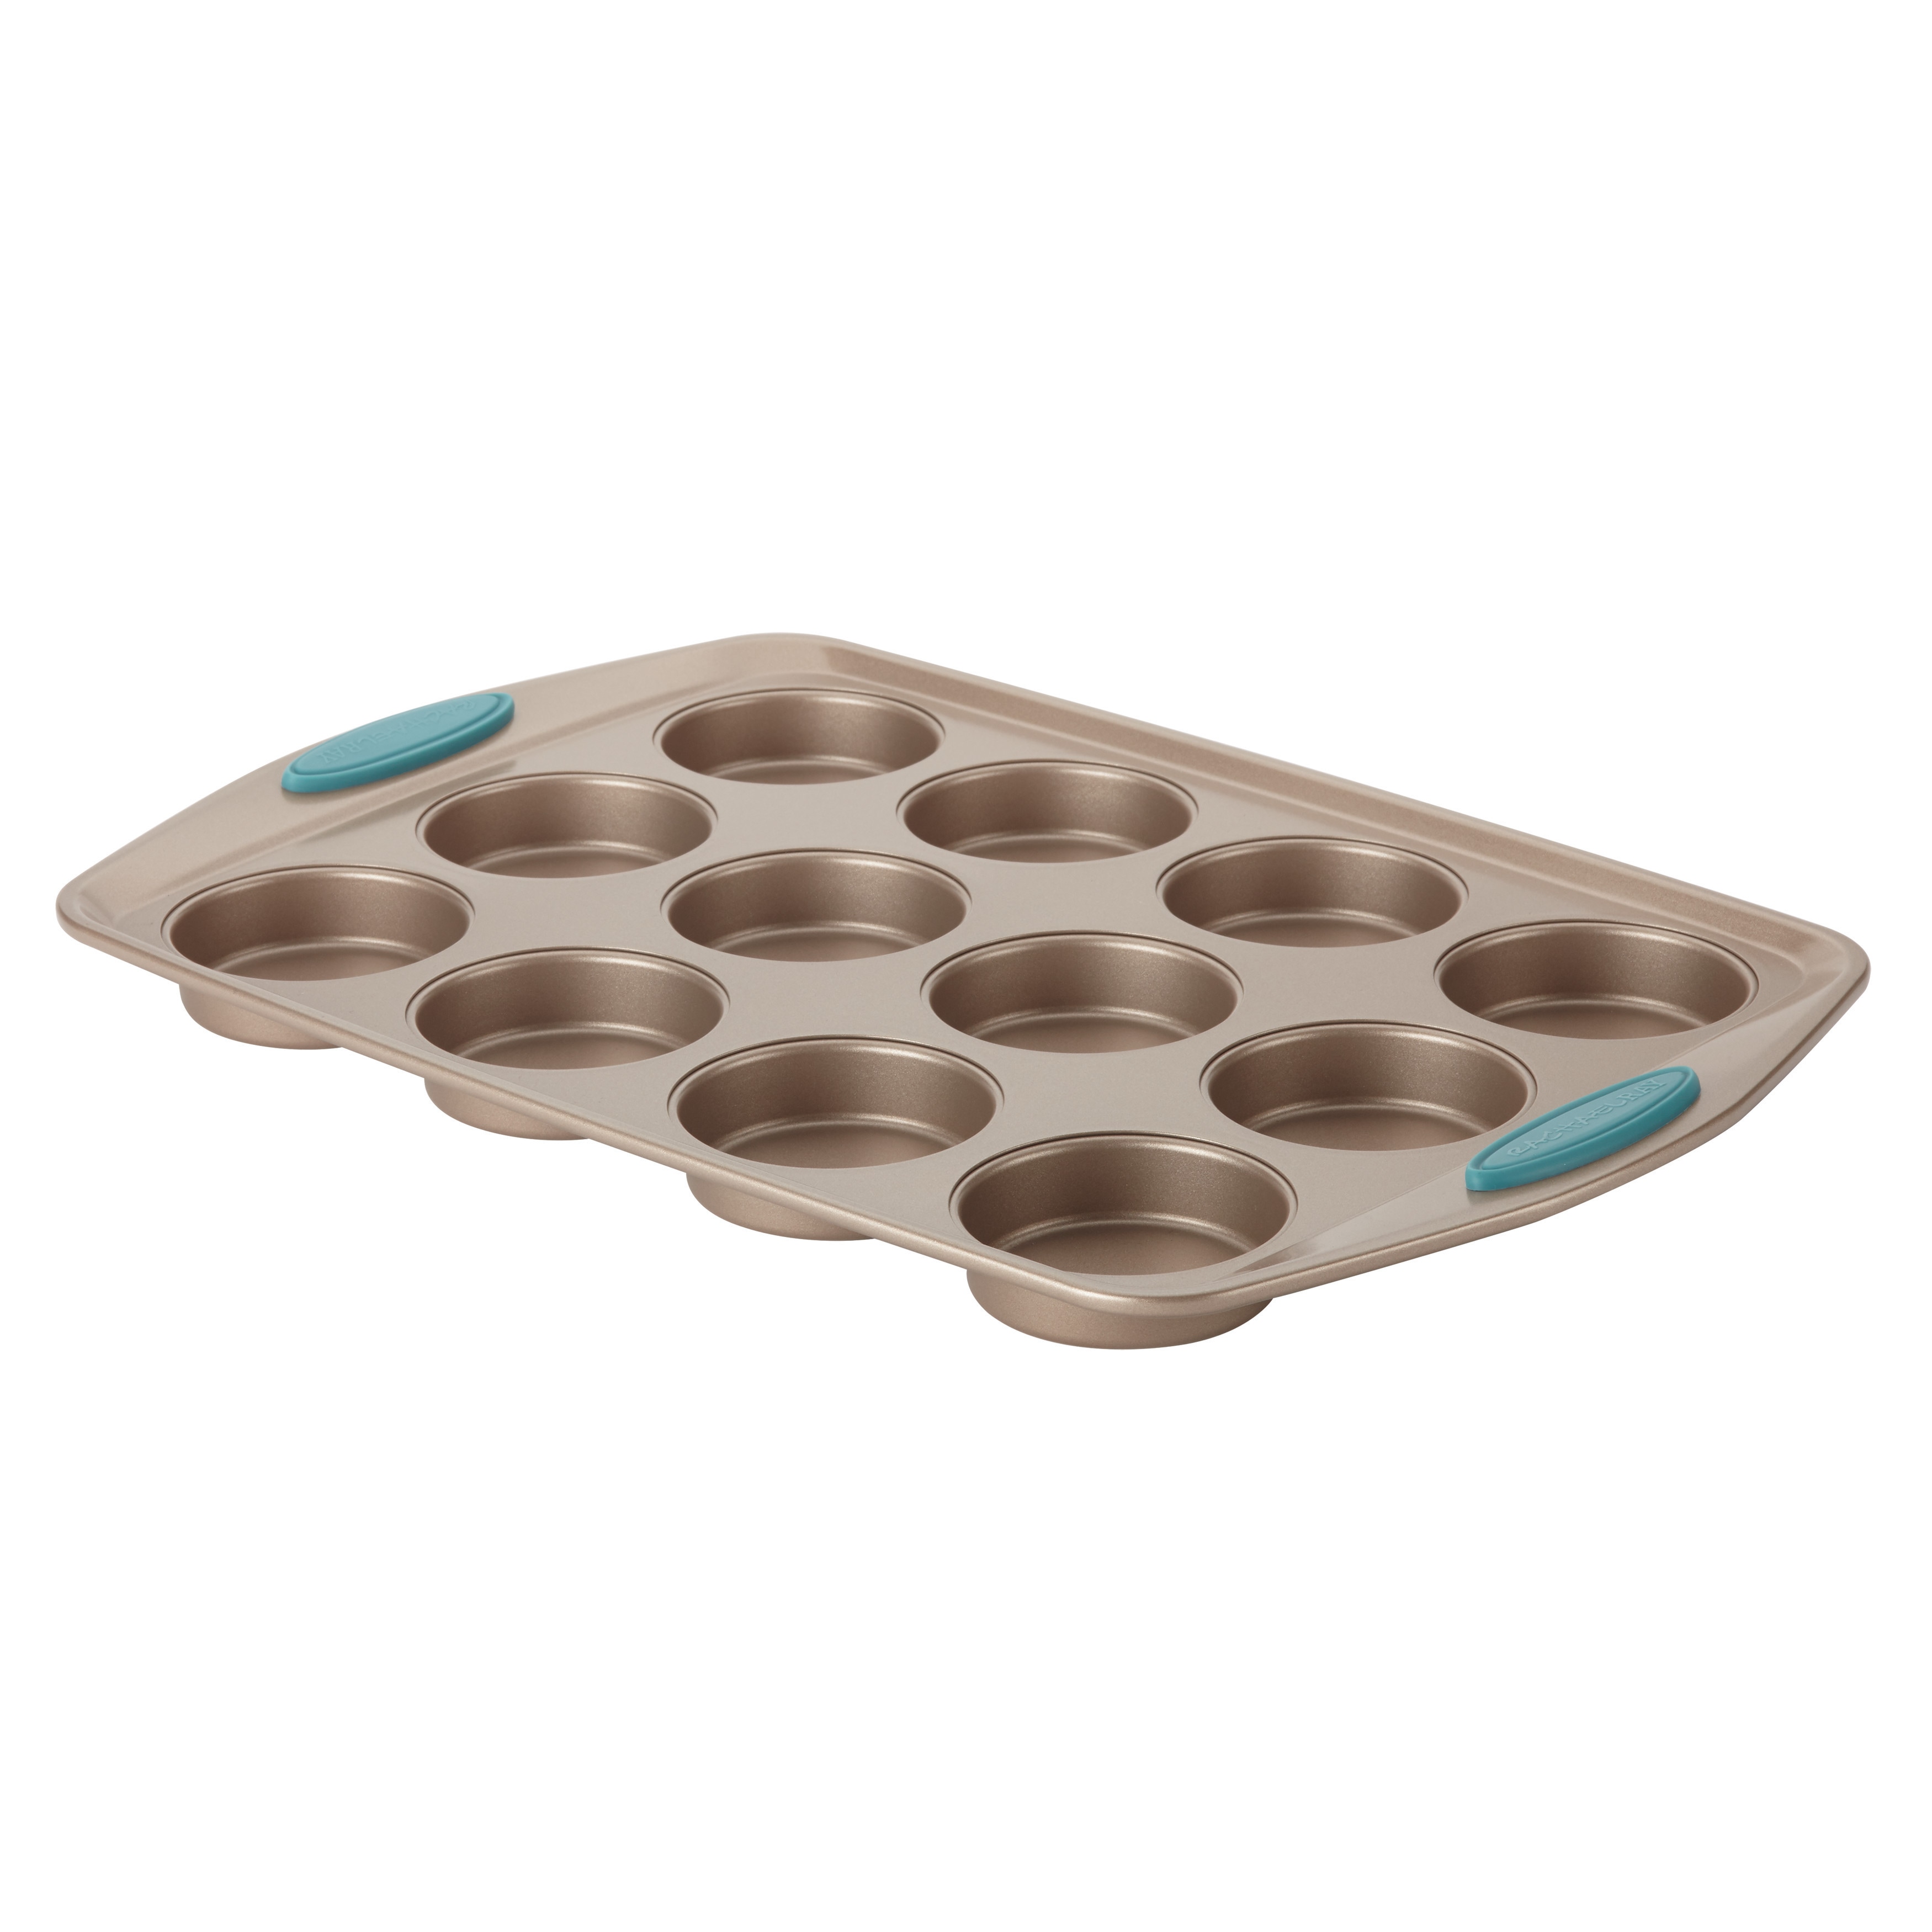 Non-stick 6 Muffin Cupcake Biscuit Pan Durable Steel Bakeware FREE SHIPPING 